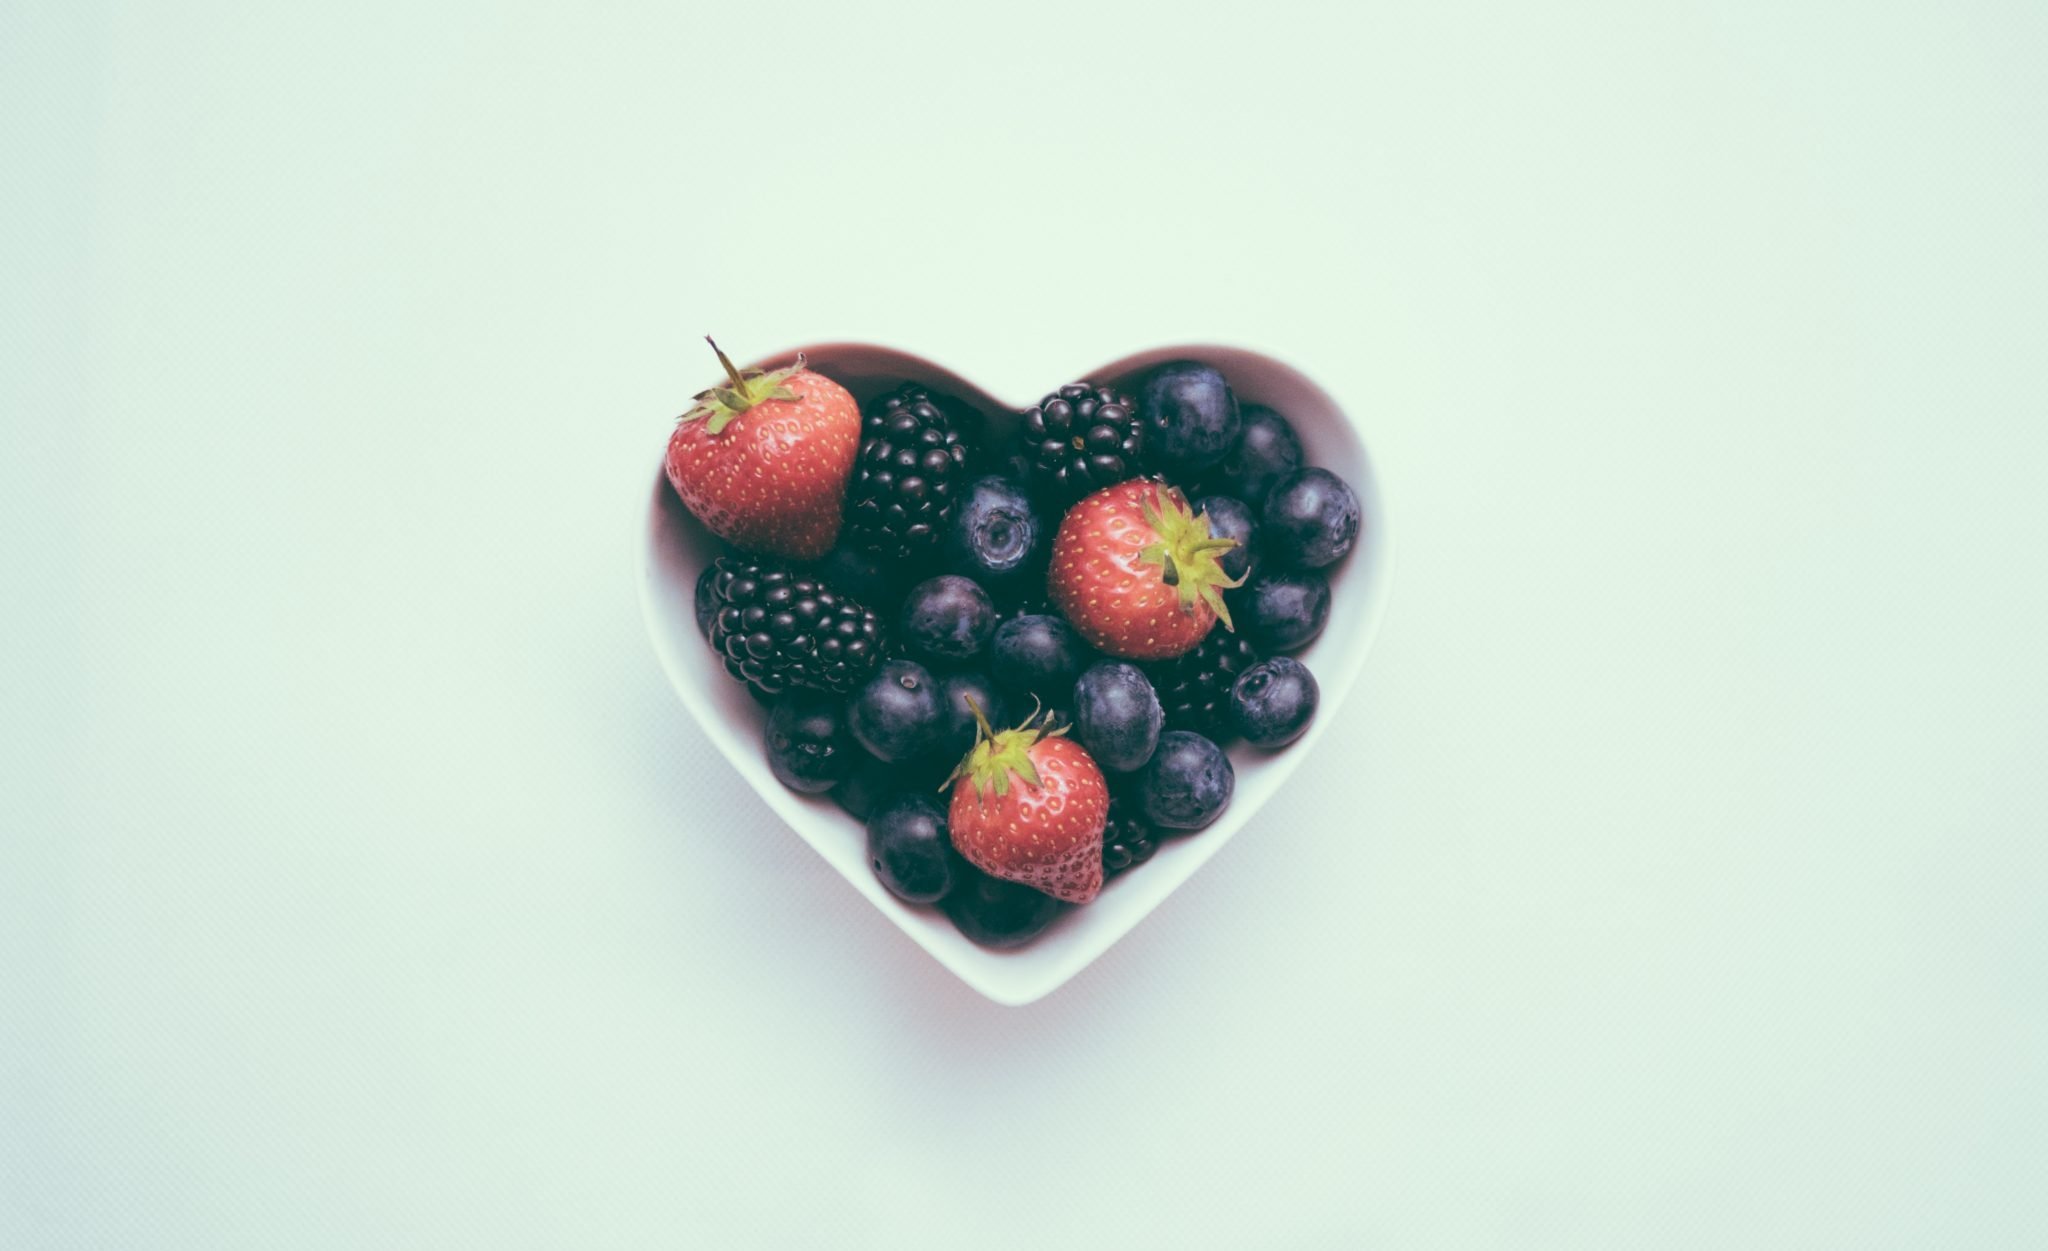 bowl of blueberries and strawberries in a love heart shaped bowl on a blue plain background